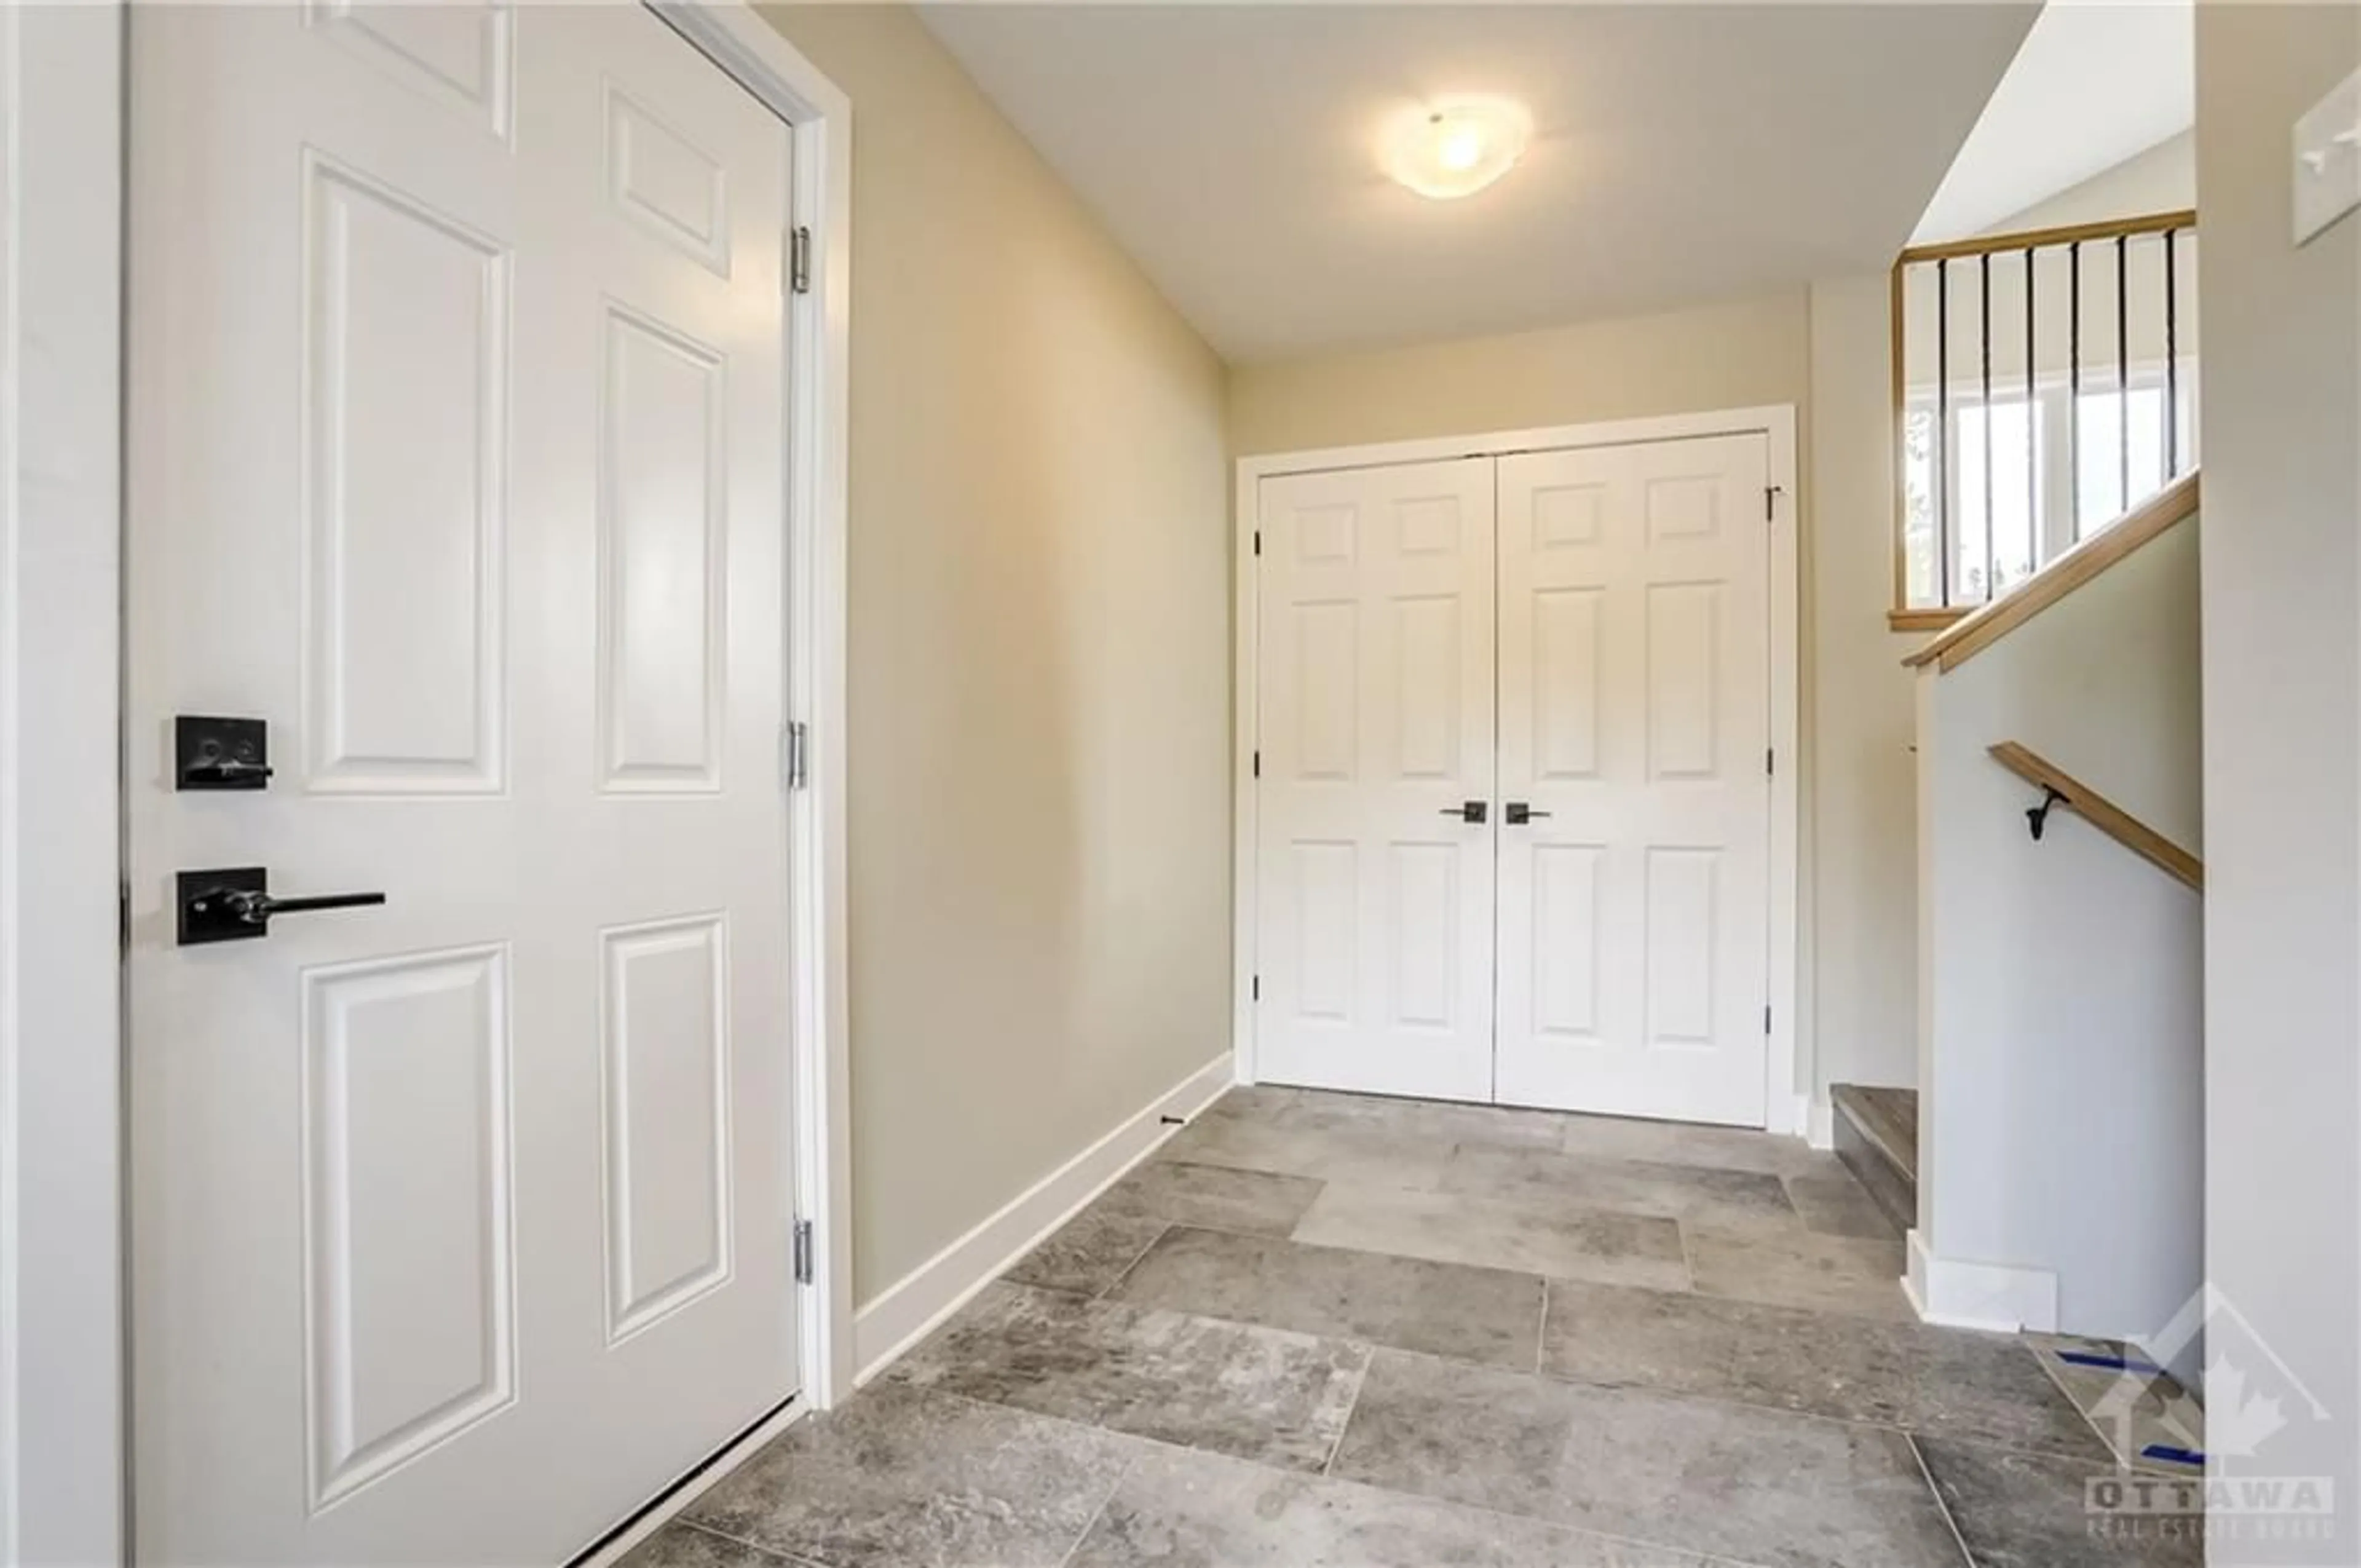 Indoor entryway for Lot 24(A) BOYD'S Rd, Carleton Place Ontario K7S 3G8